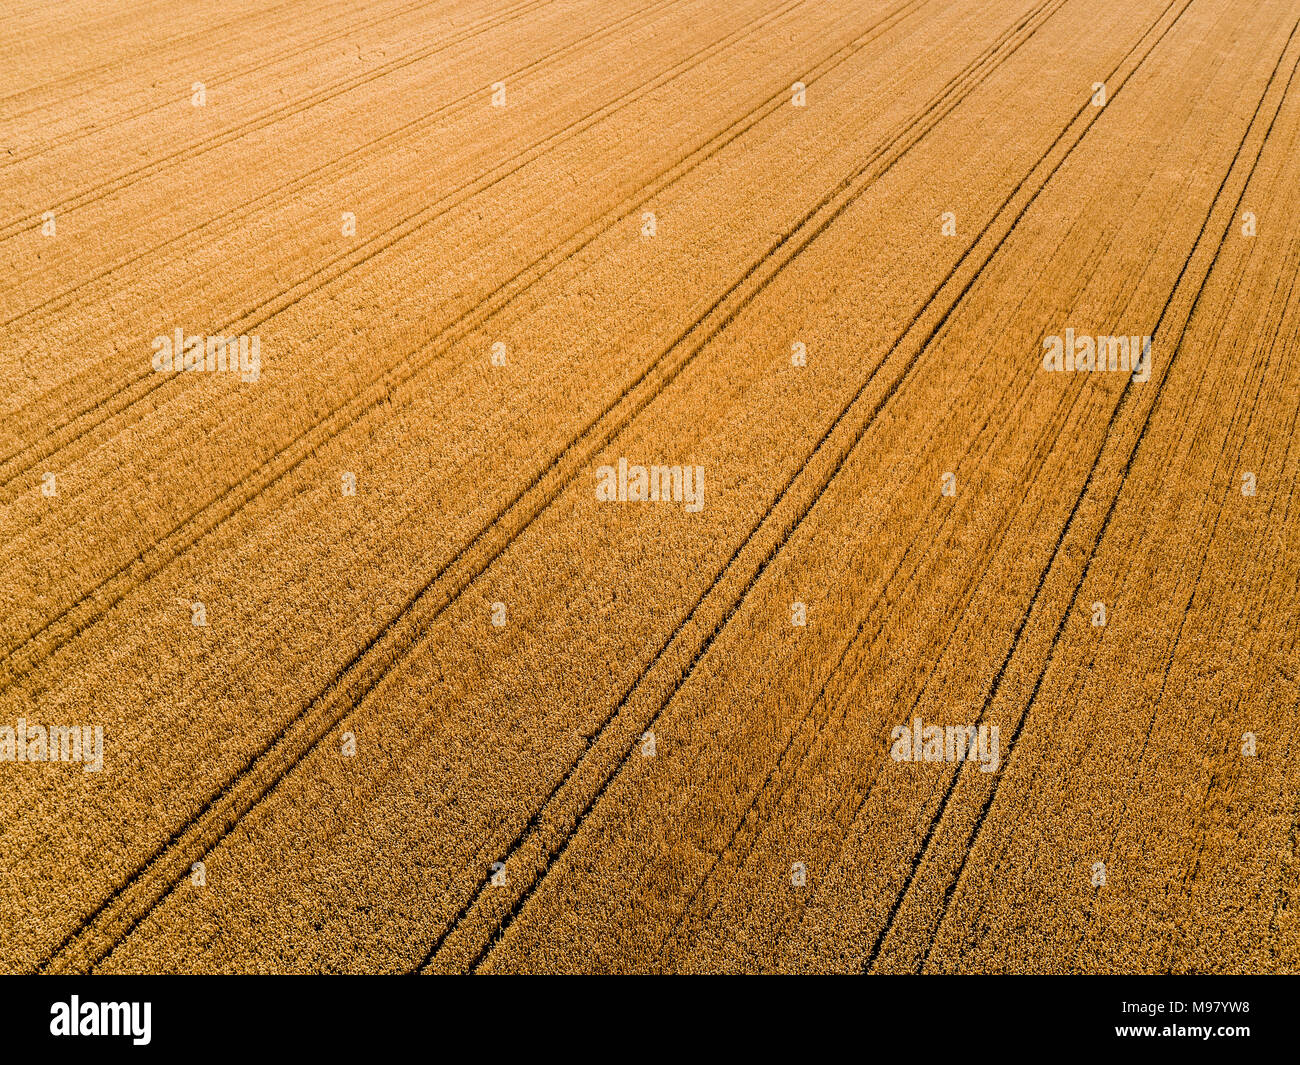 Serbia, Vojvodina, agricultural fields, aerial view at summer season Stock Photo